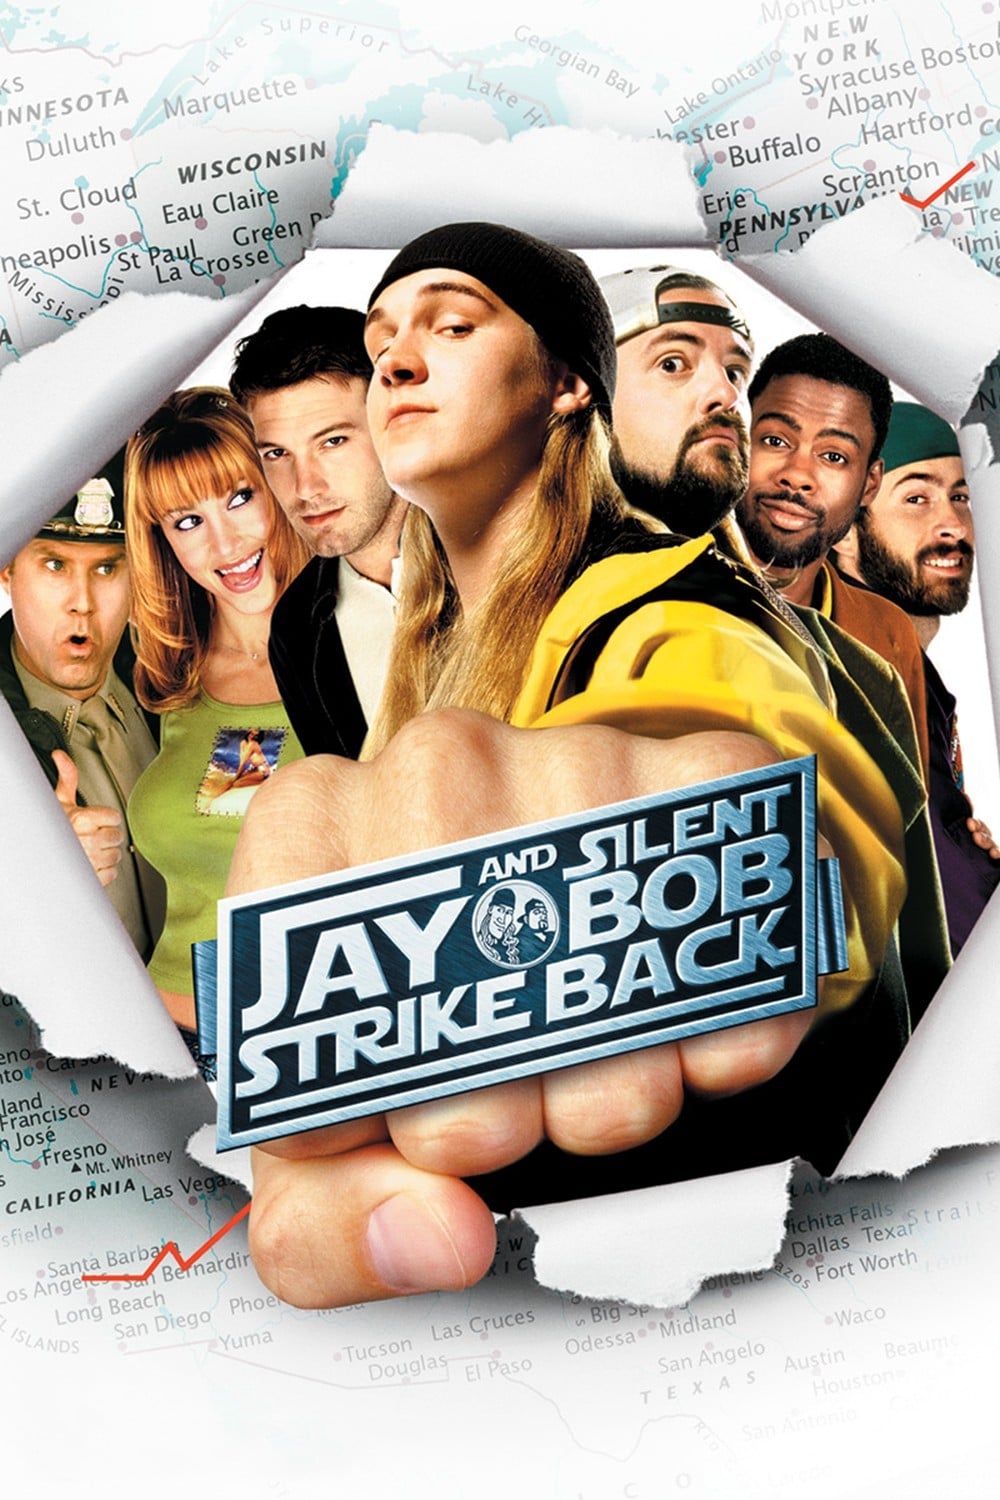 Poster for the movie "Jay and Silent Bob Strike Back"